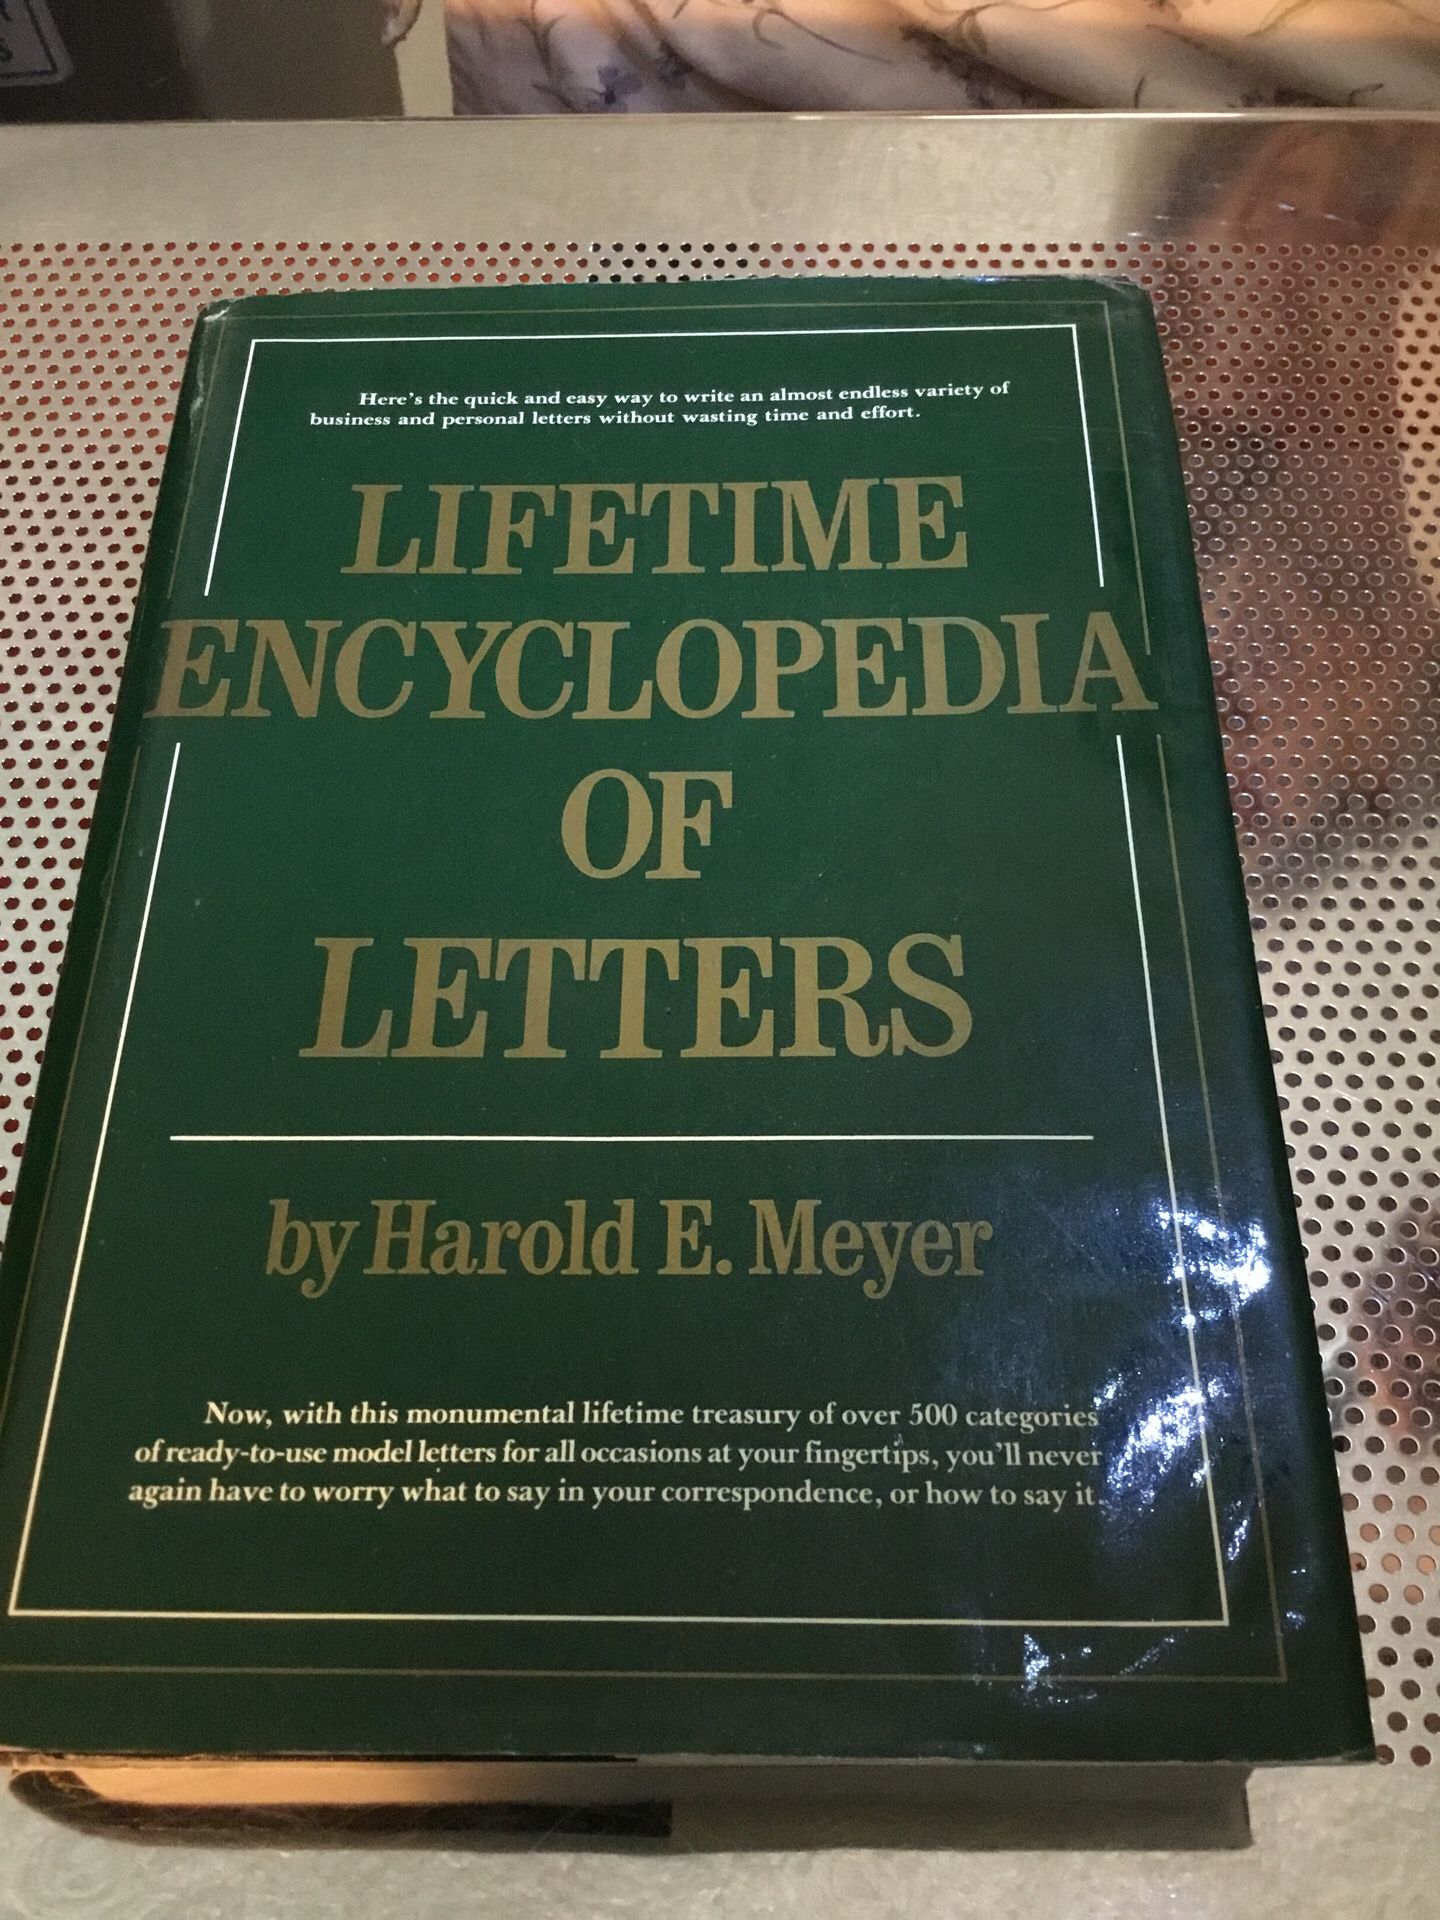 Lifetime Encyclopedia Of Letters by Harold E. Meyer. Hardcover. Large book.